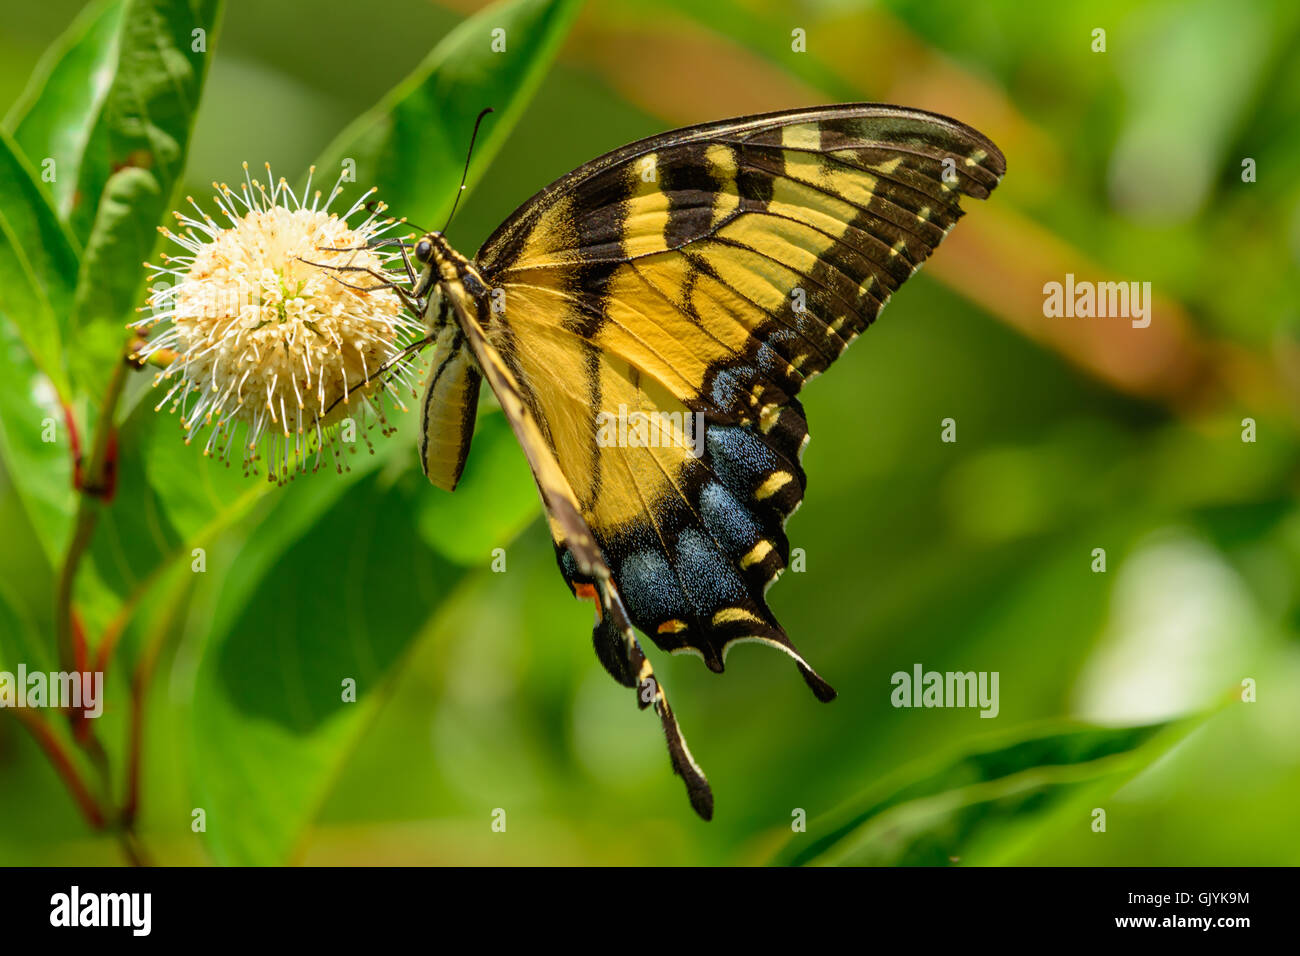 Eastern tiger swallowtail (Papilio glaucus) butterfly on flower. blurred green background Stock Photo